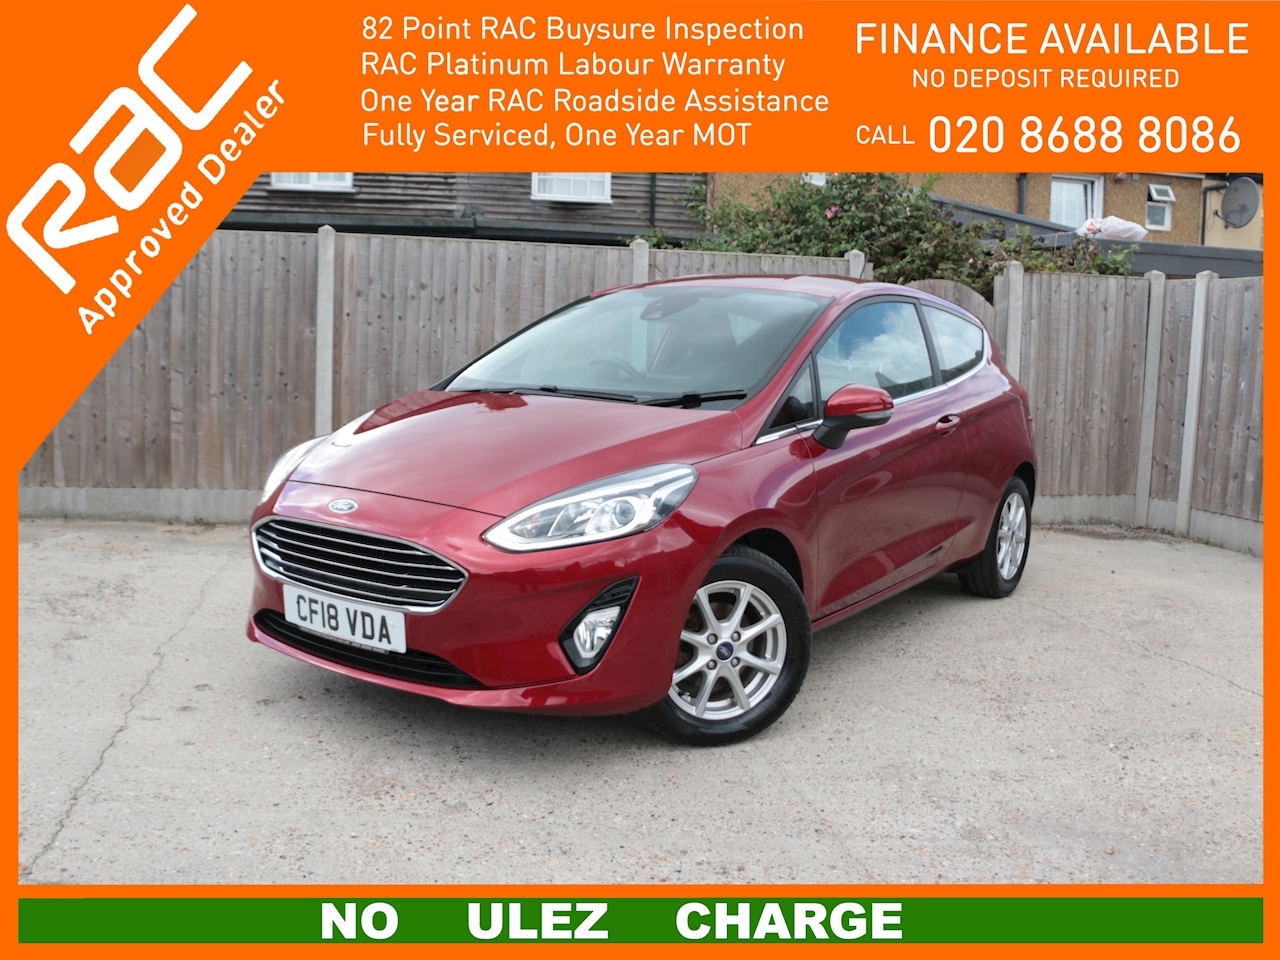 Used 2018 Ford Ford Fiesta 1 0t 100 Ps Ecoboost Zetec Hatchback 3 Door For Sale Mccarthy Cars Uk Limited